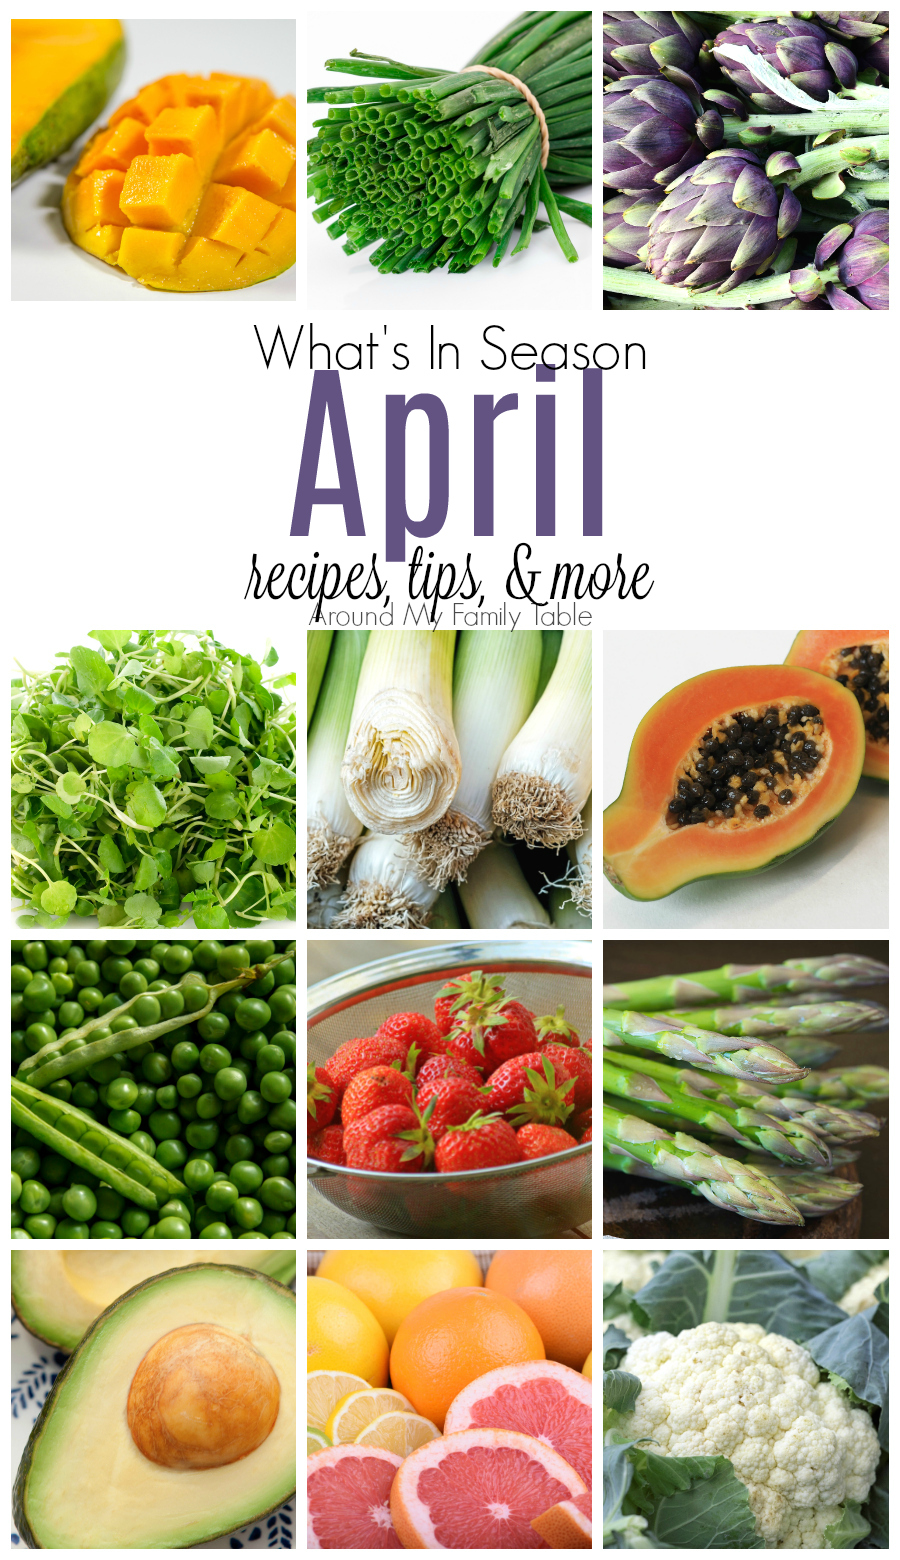 This April -- What’s In Season Guide is full of tips and recipes to inspire you to shop and eat seasonally. April Seasonal Produce is full of greens and lots of fruits.